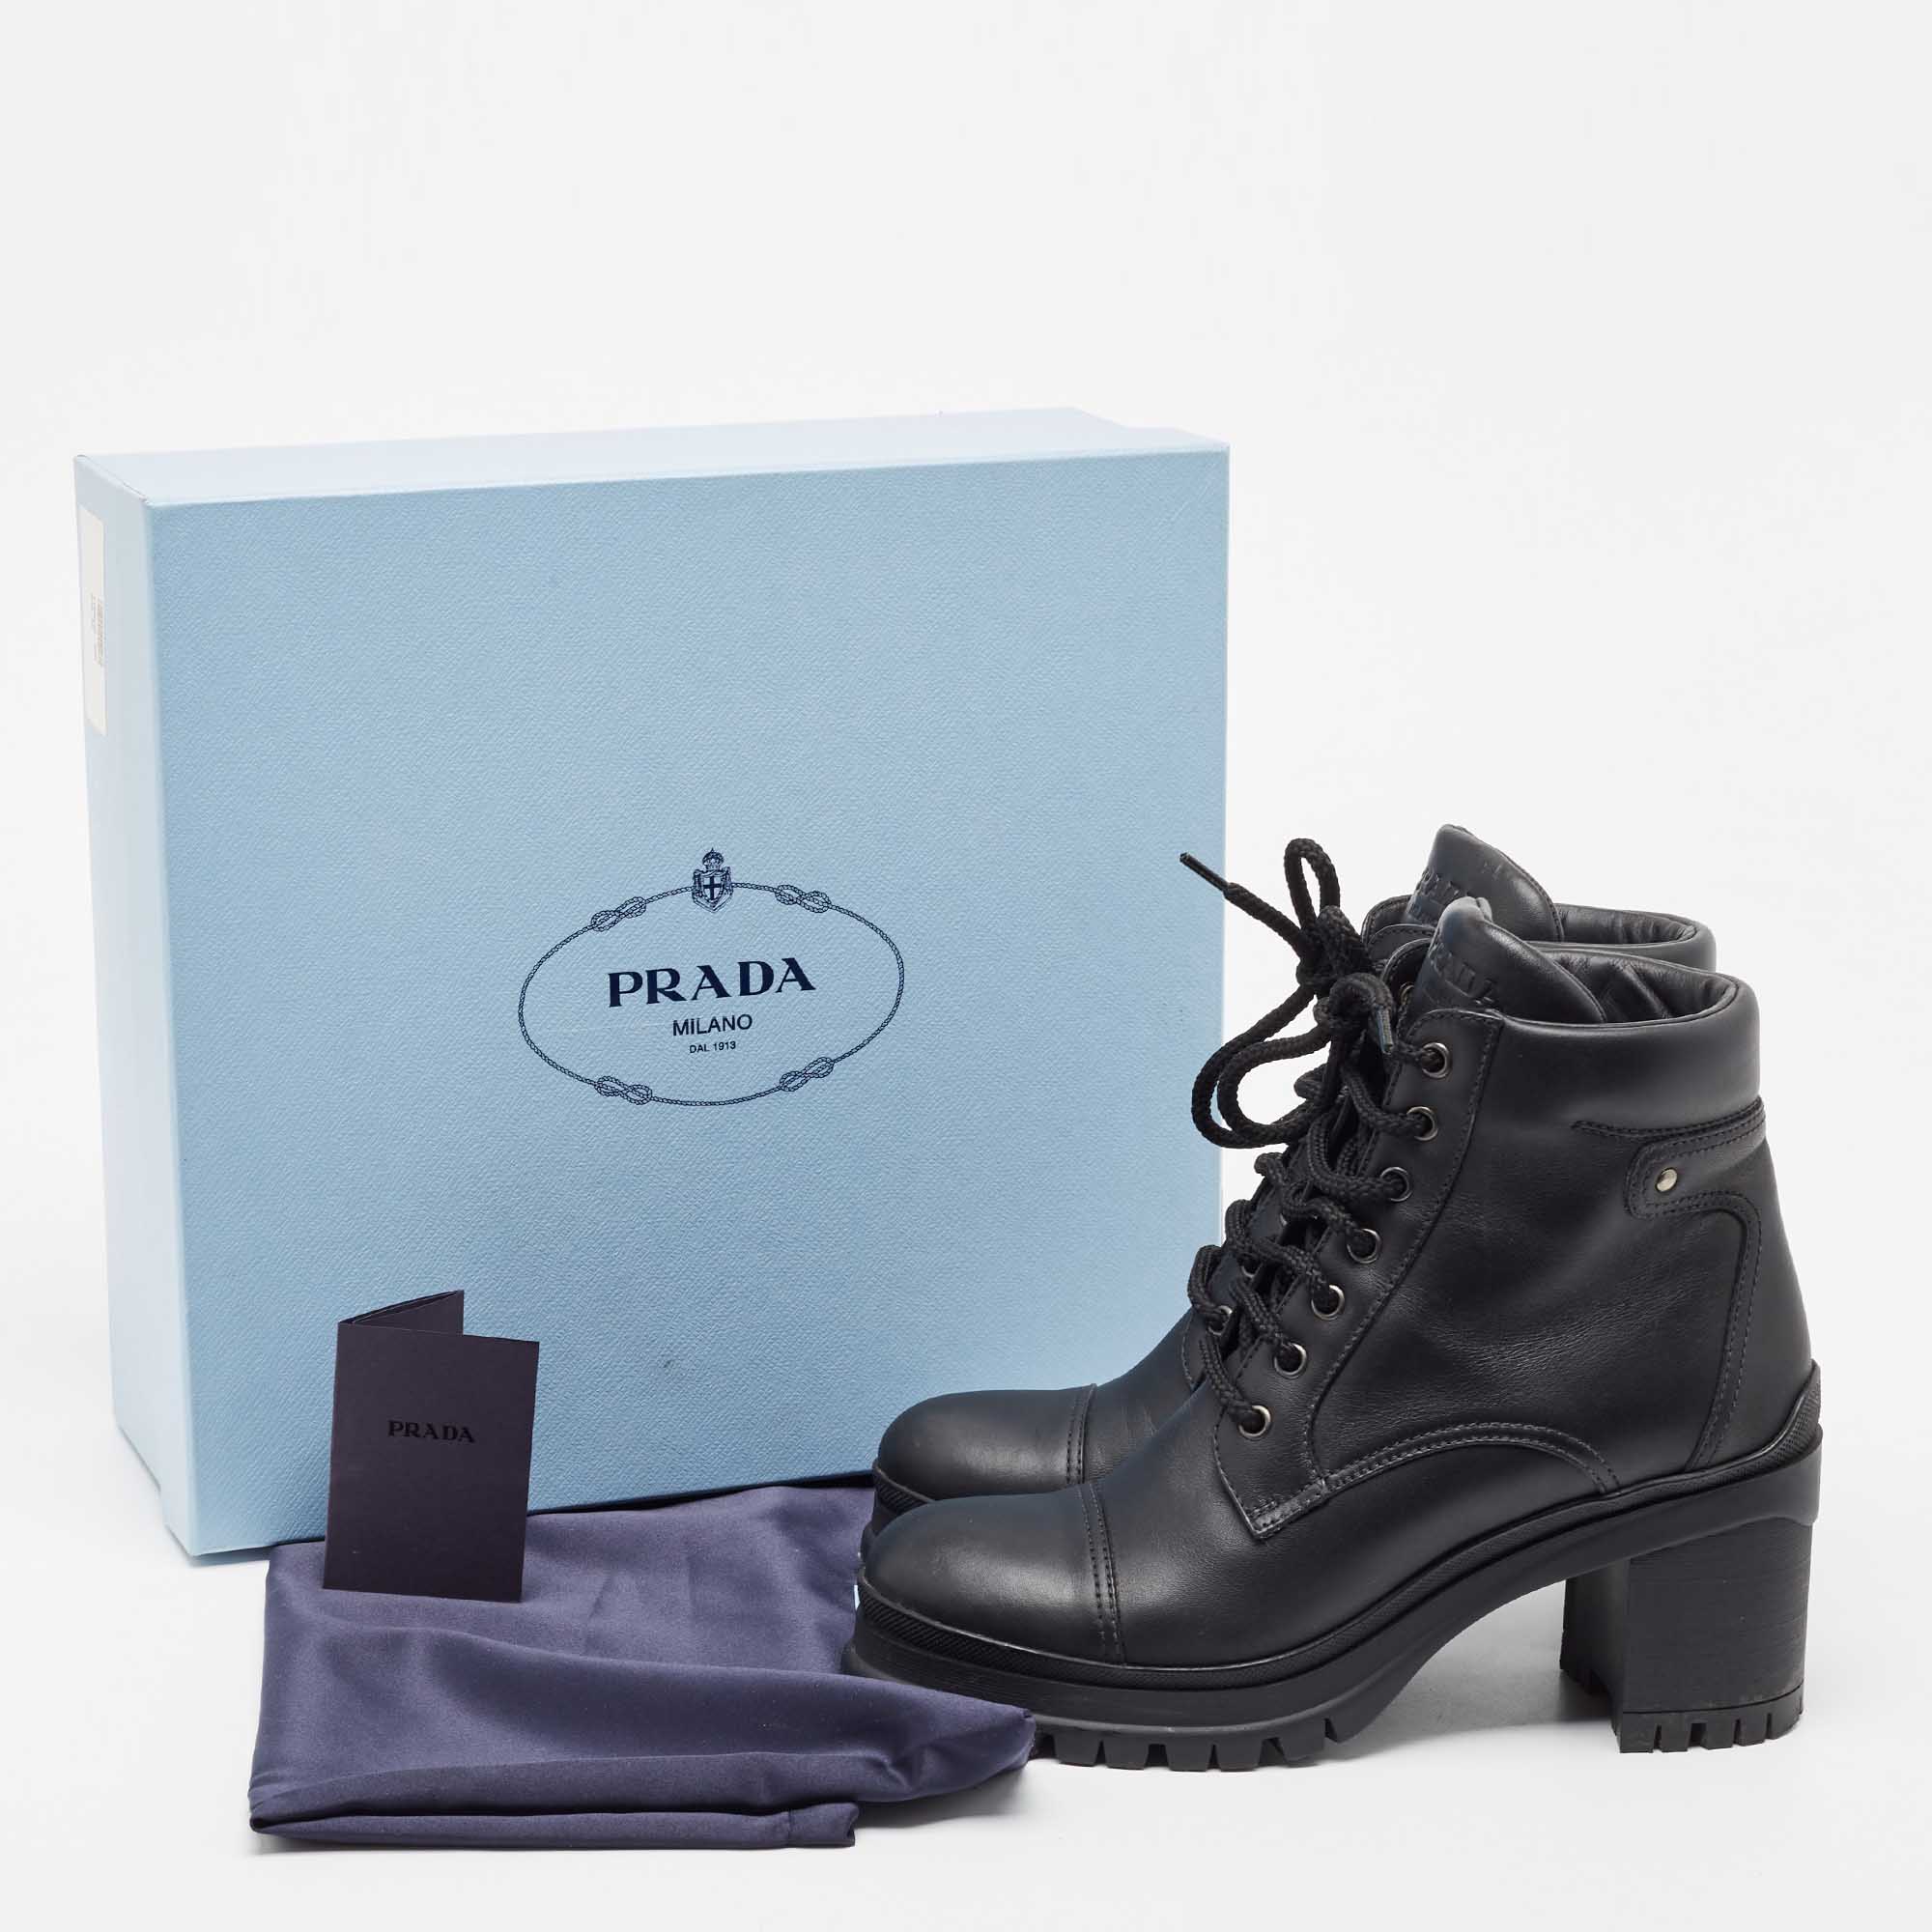 Prada Black Leather Lace Up Ankle Boots Size 39